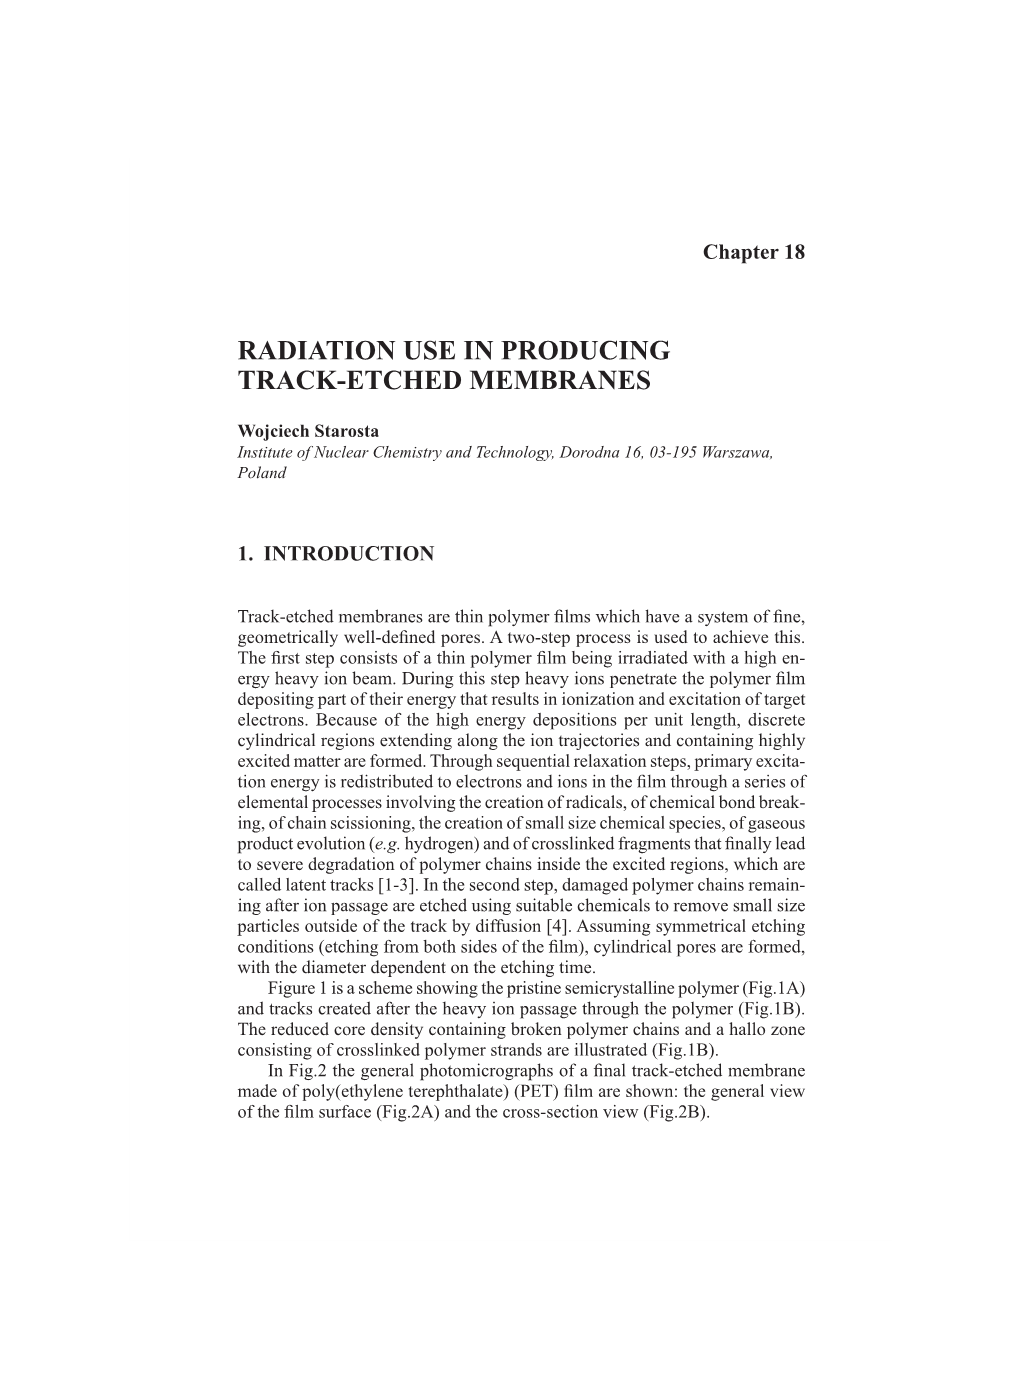 Radiation Use in Producing Track-Etched Membranes